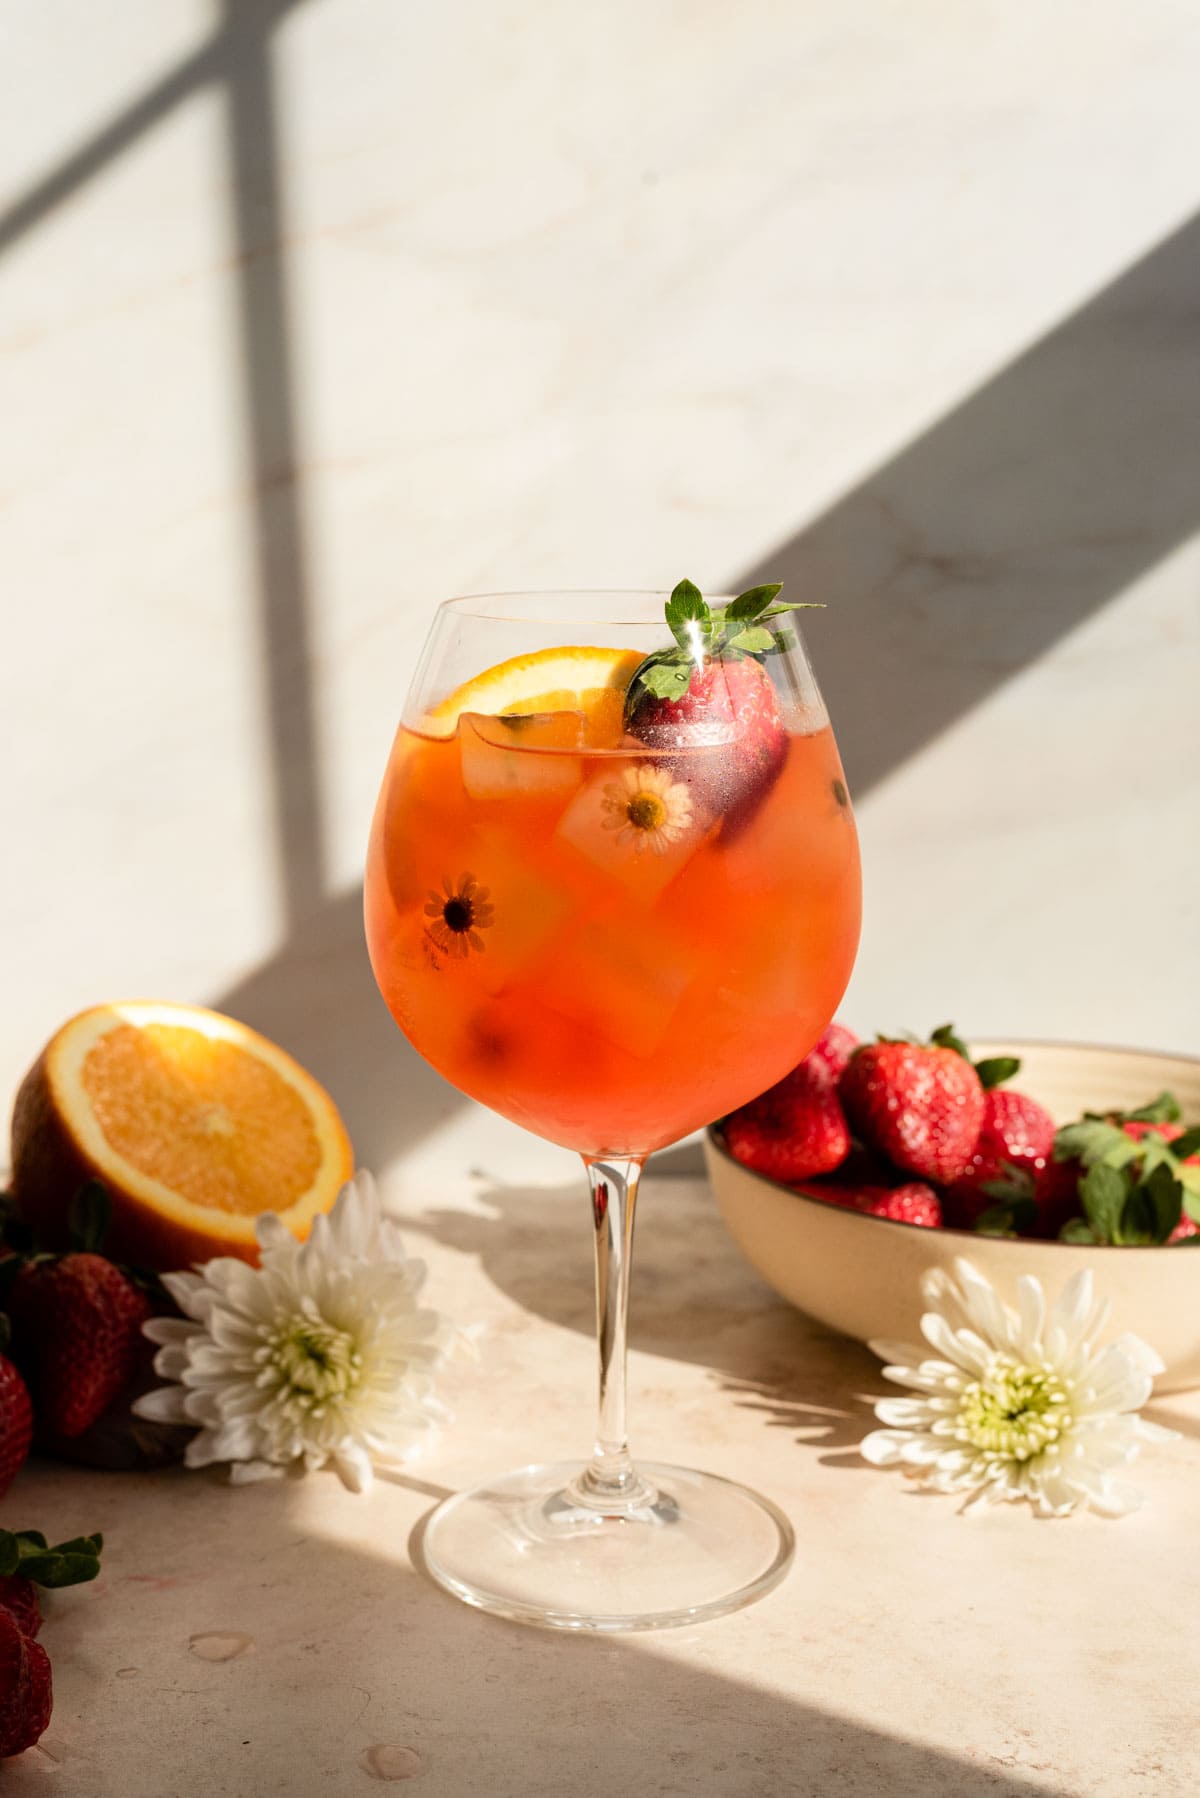 The cocktail has been garnished with an orange slice and a strawberry.